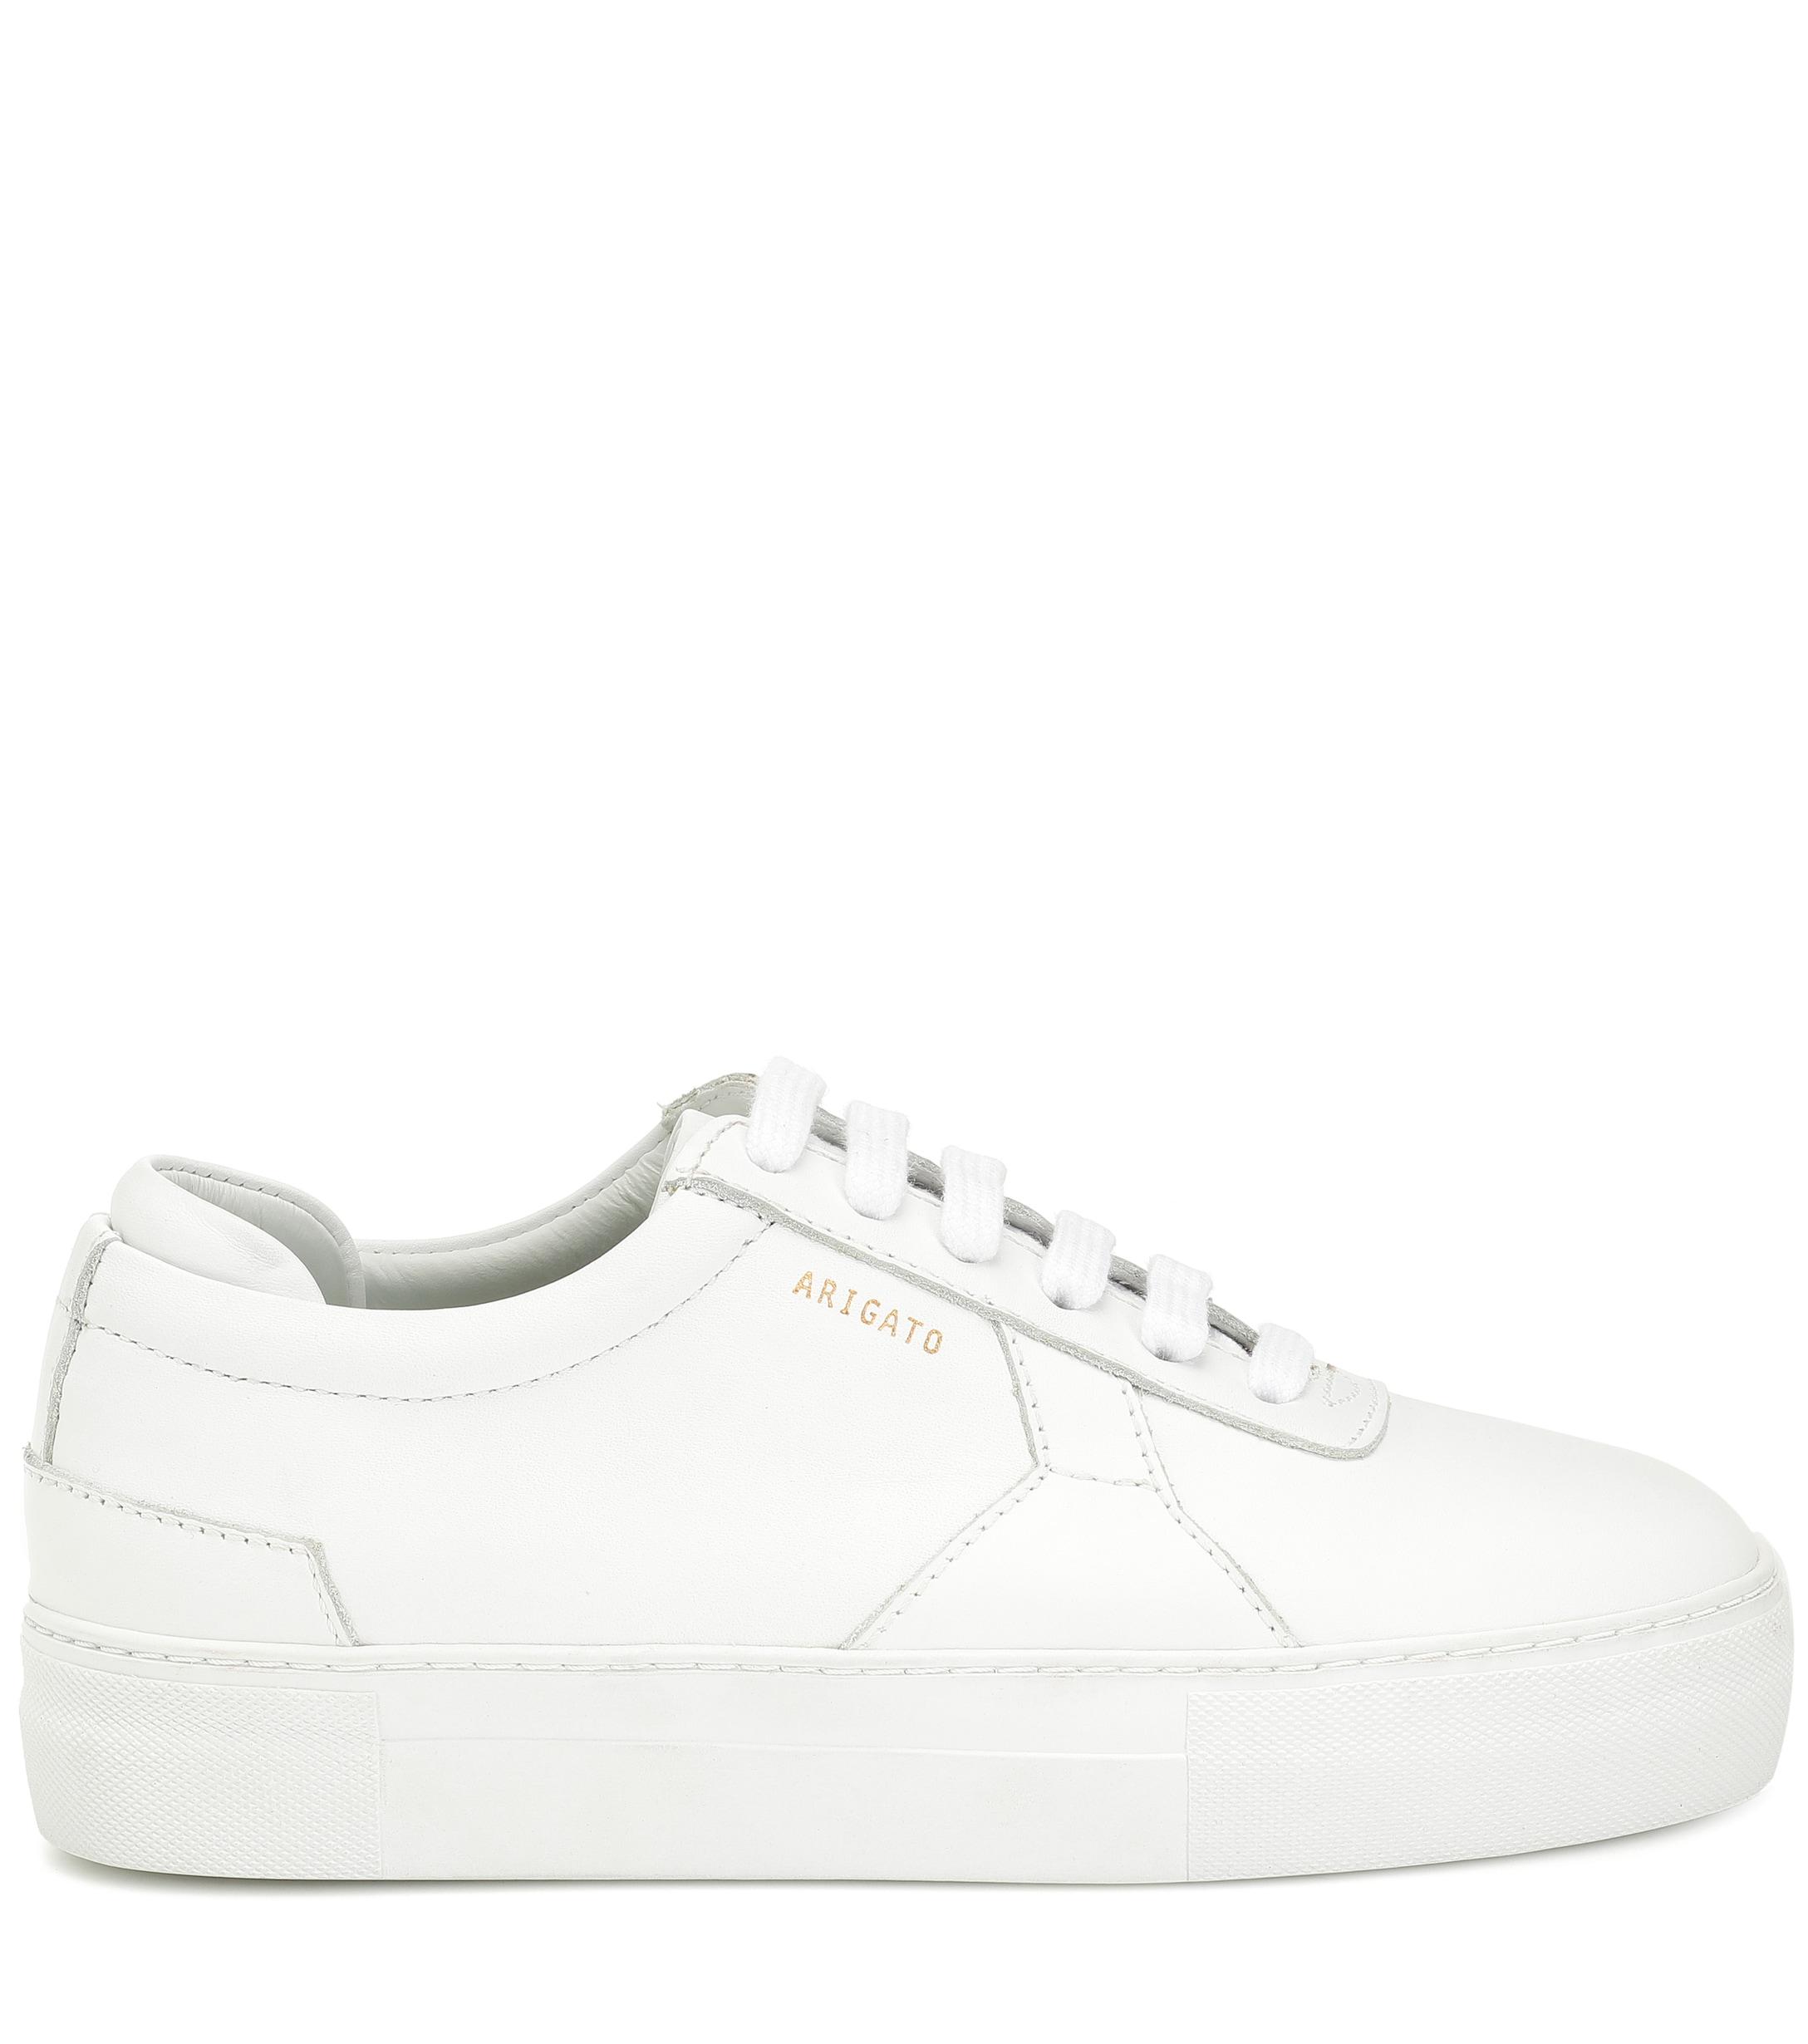 Axel Arigato Platform Leather Sneakers in White - Lyst